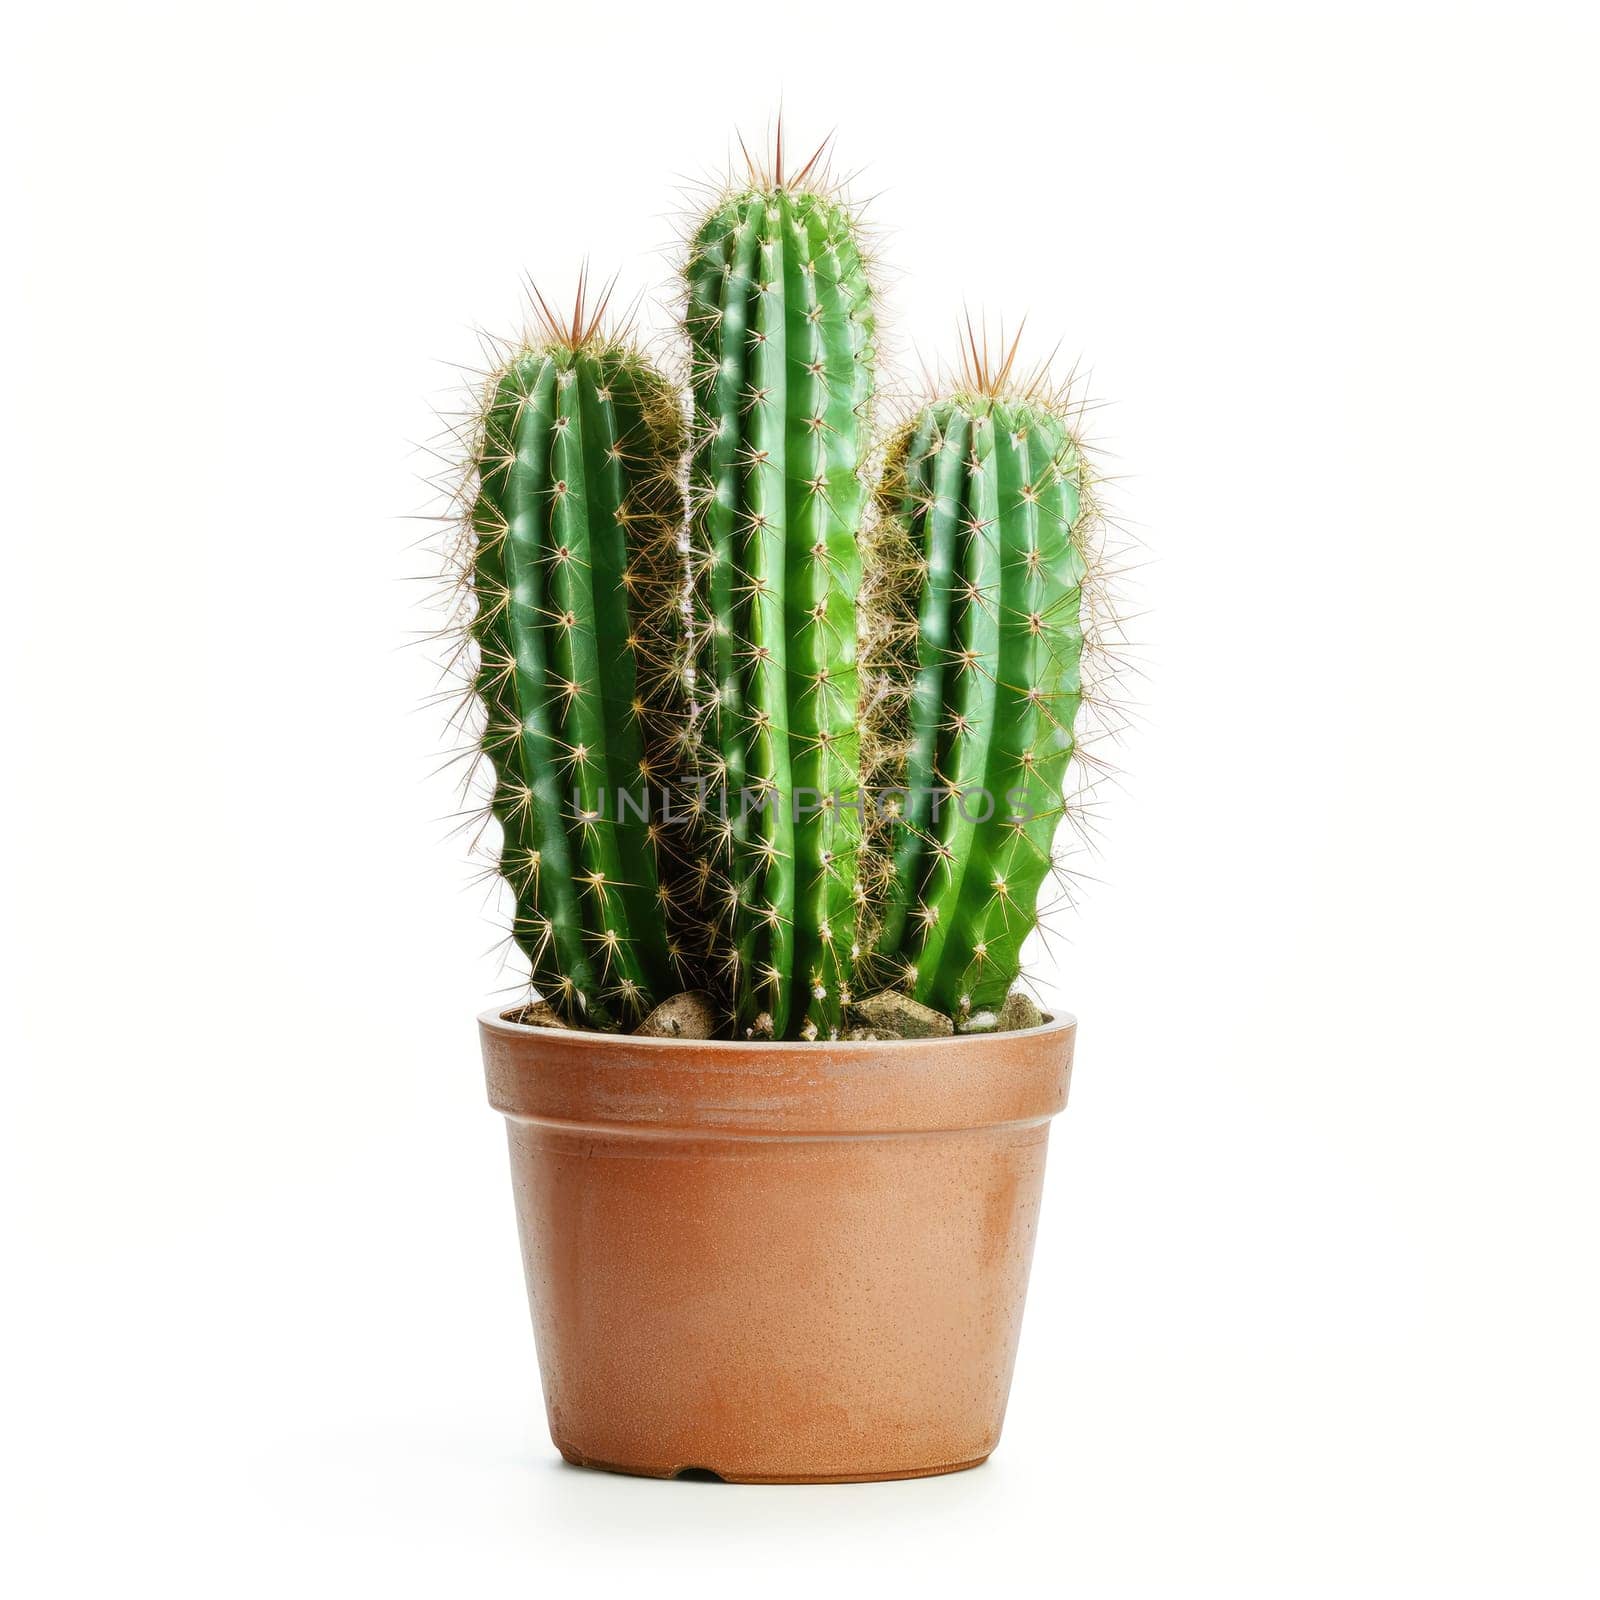 cactus in a vase isolated on white background by Ramanouskaya